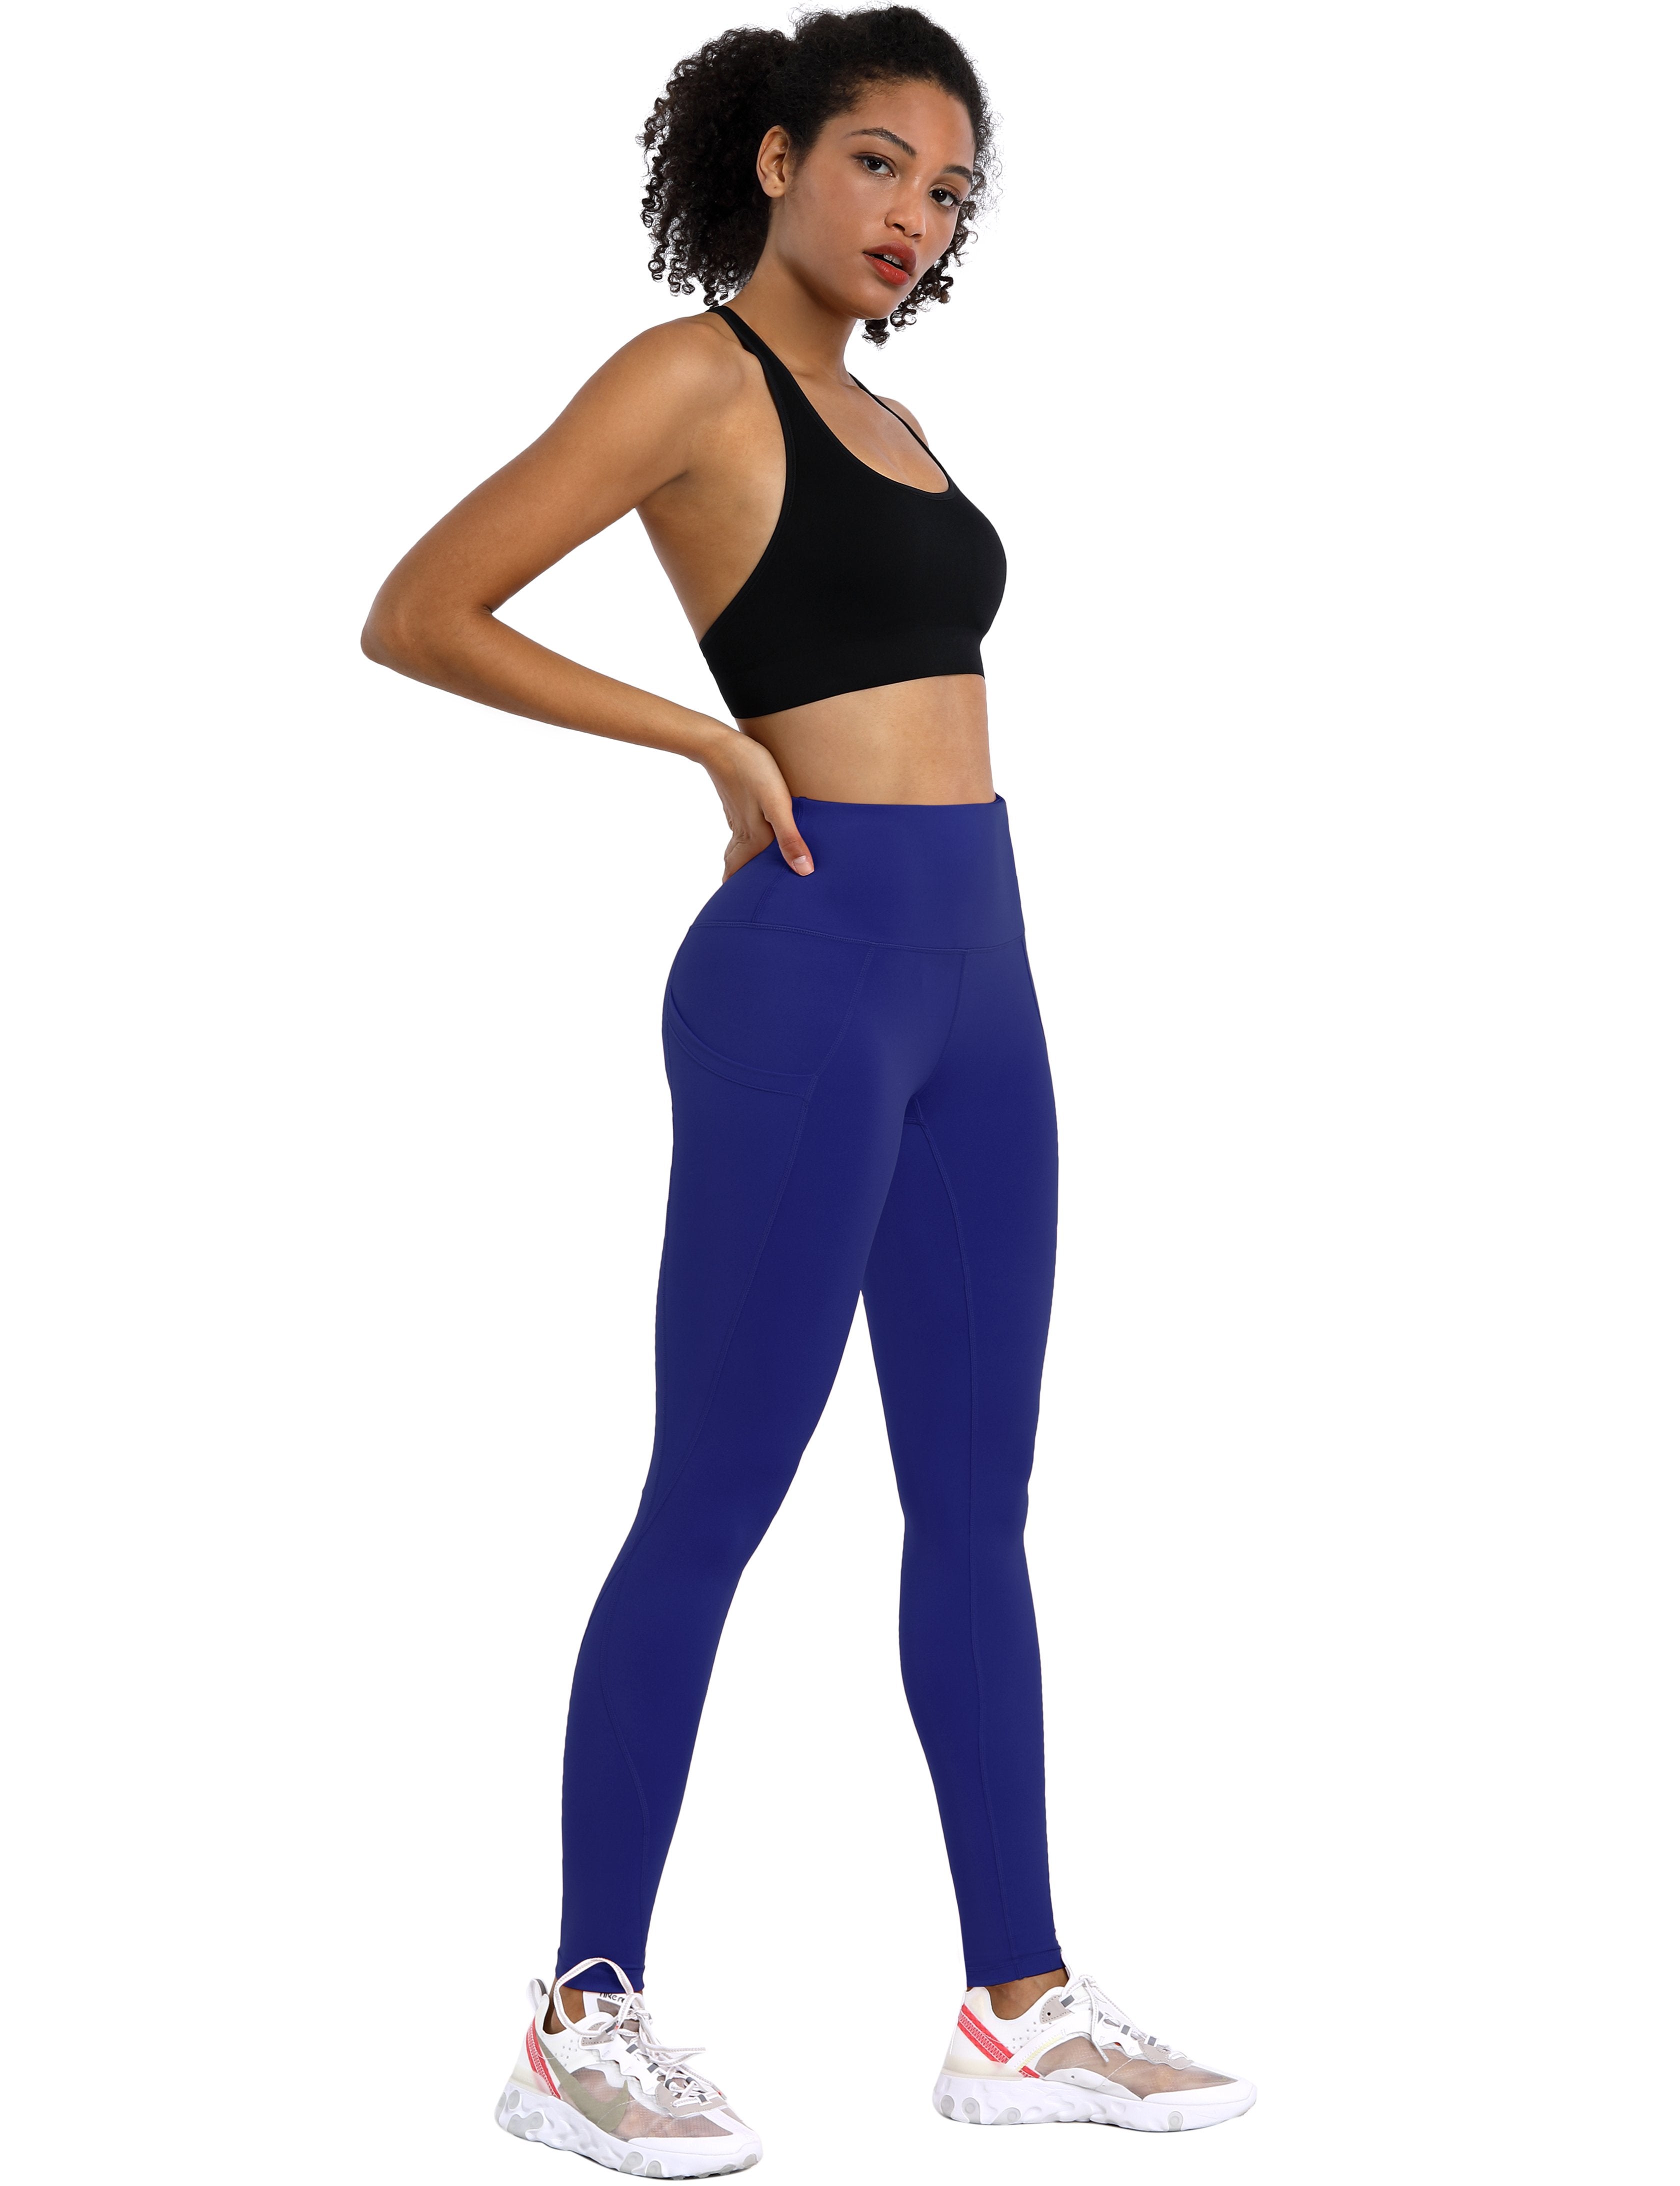 High Waist Side Pockets Gym Pants navy 75% Nylon, 25% Spandex Fabric doesn't attract lint easily 4-way stretch No see-through Moisture-wicking Tummy control Inner pocket